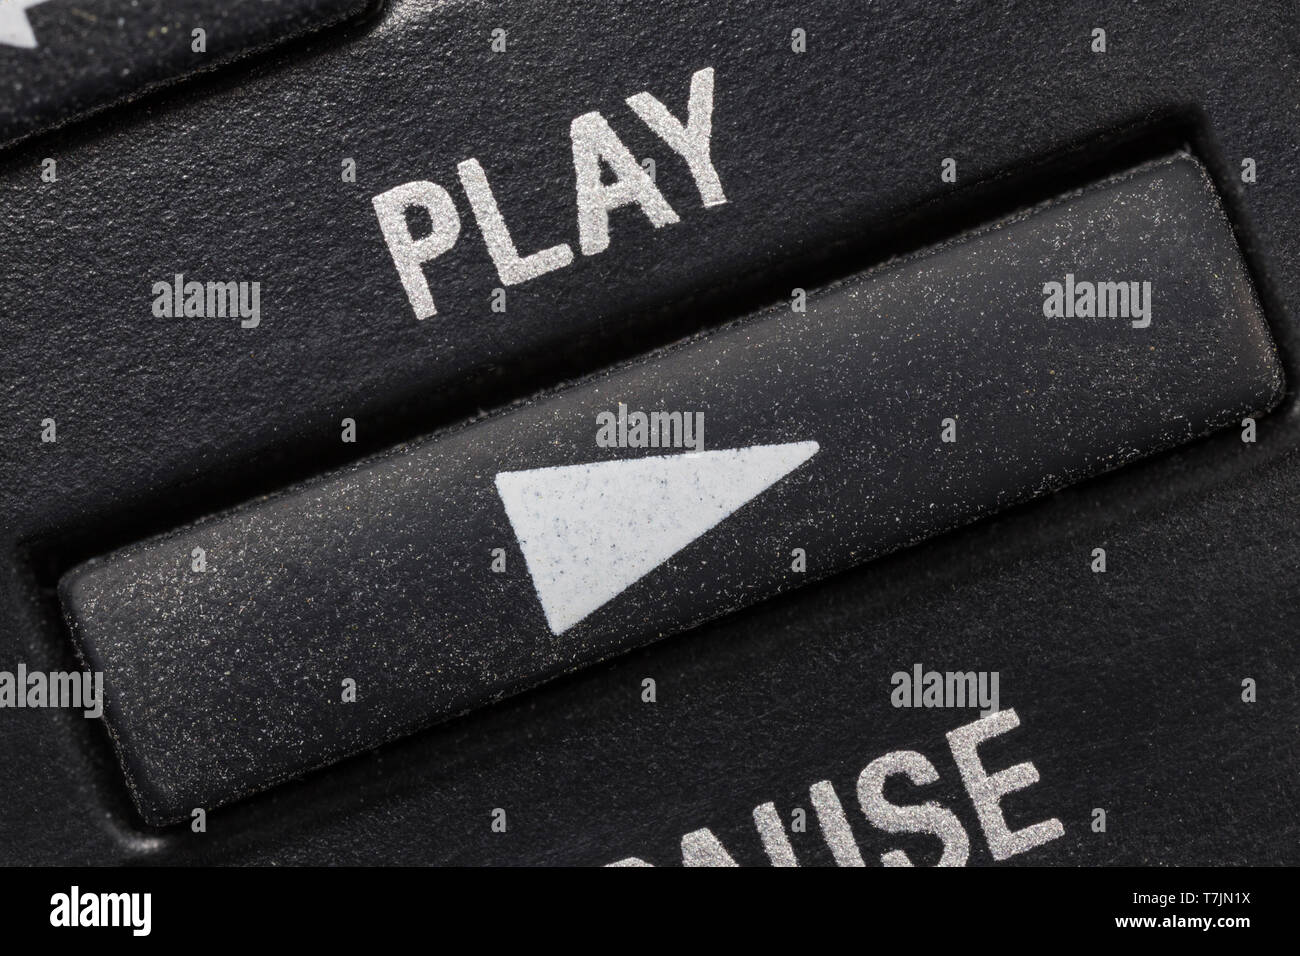 Television remote control play button macro close up detail. Stock Photo